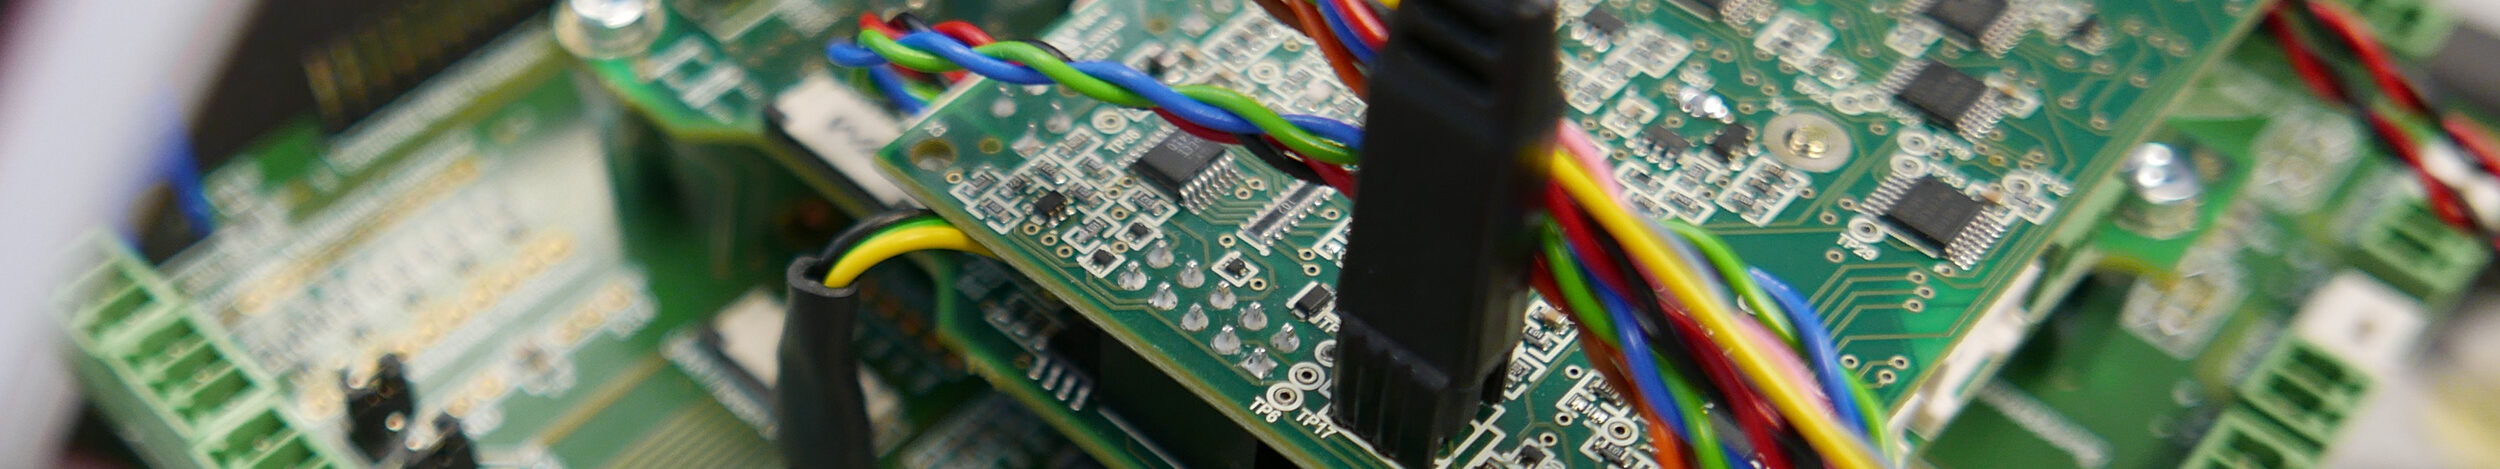 Hardware development as the basis for a successful mechatronic product